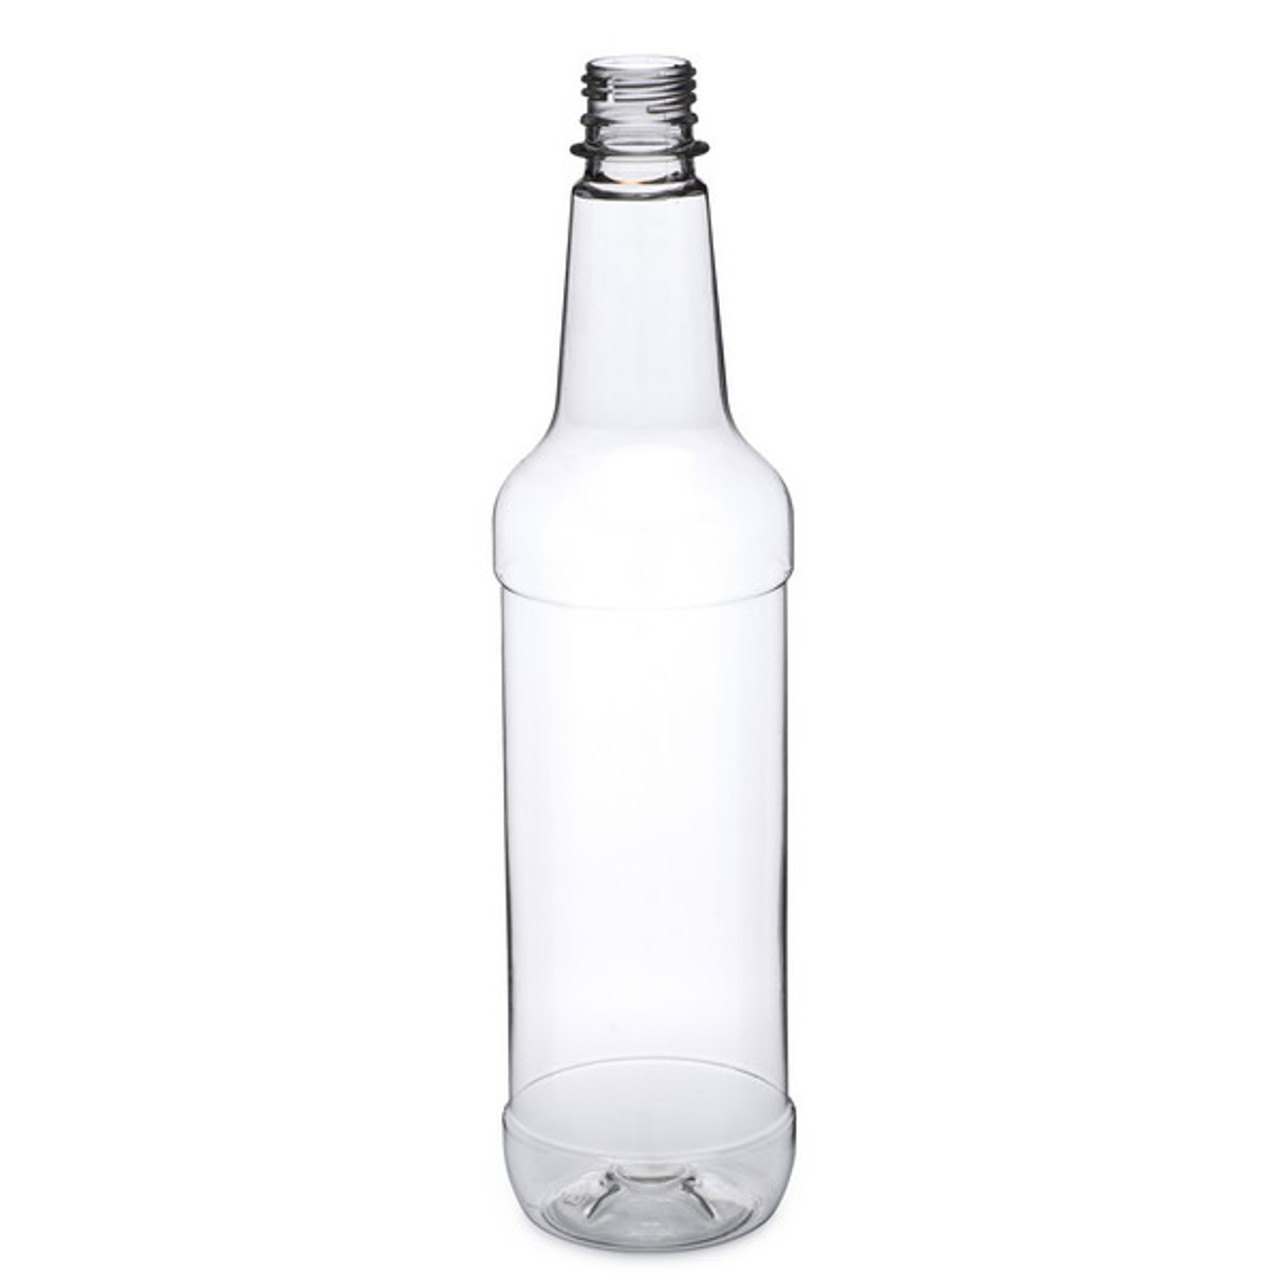 100 ml Clear PET Flasks (Bulk), Caps NOT Included